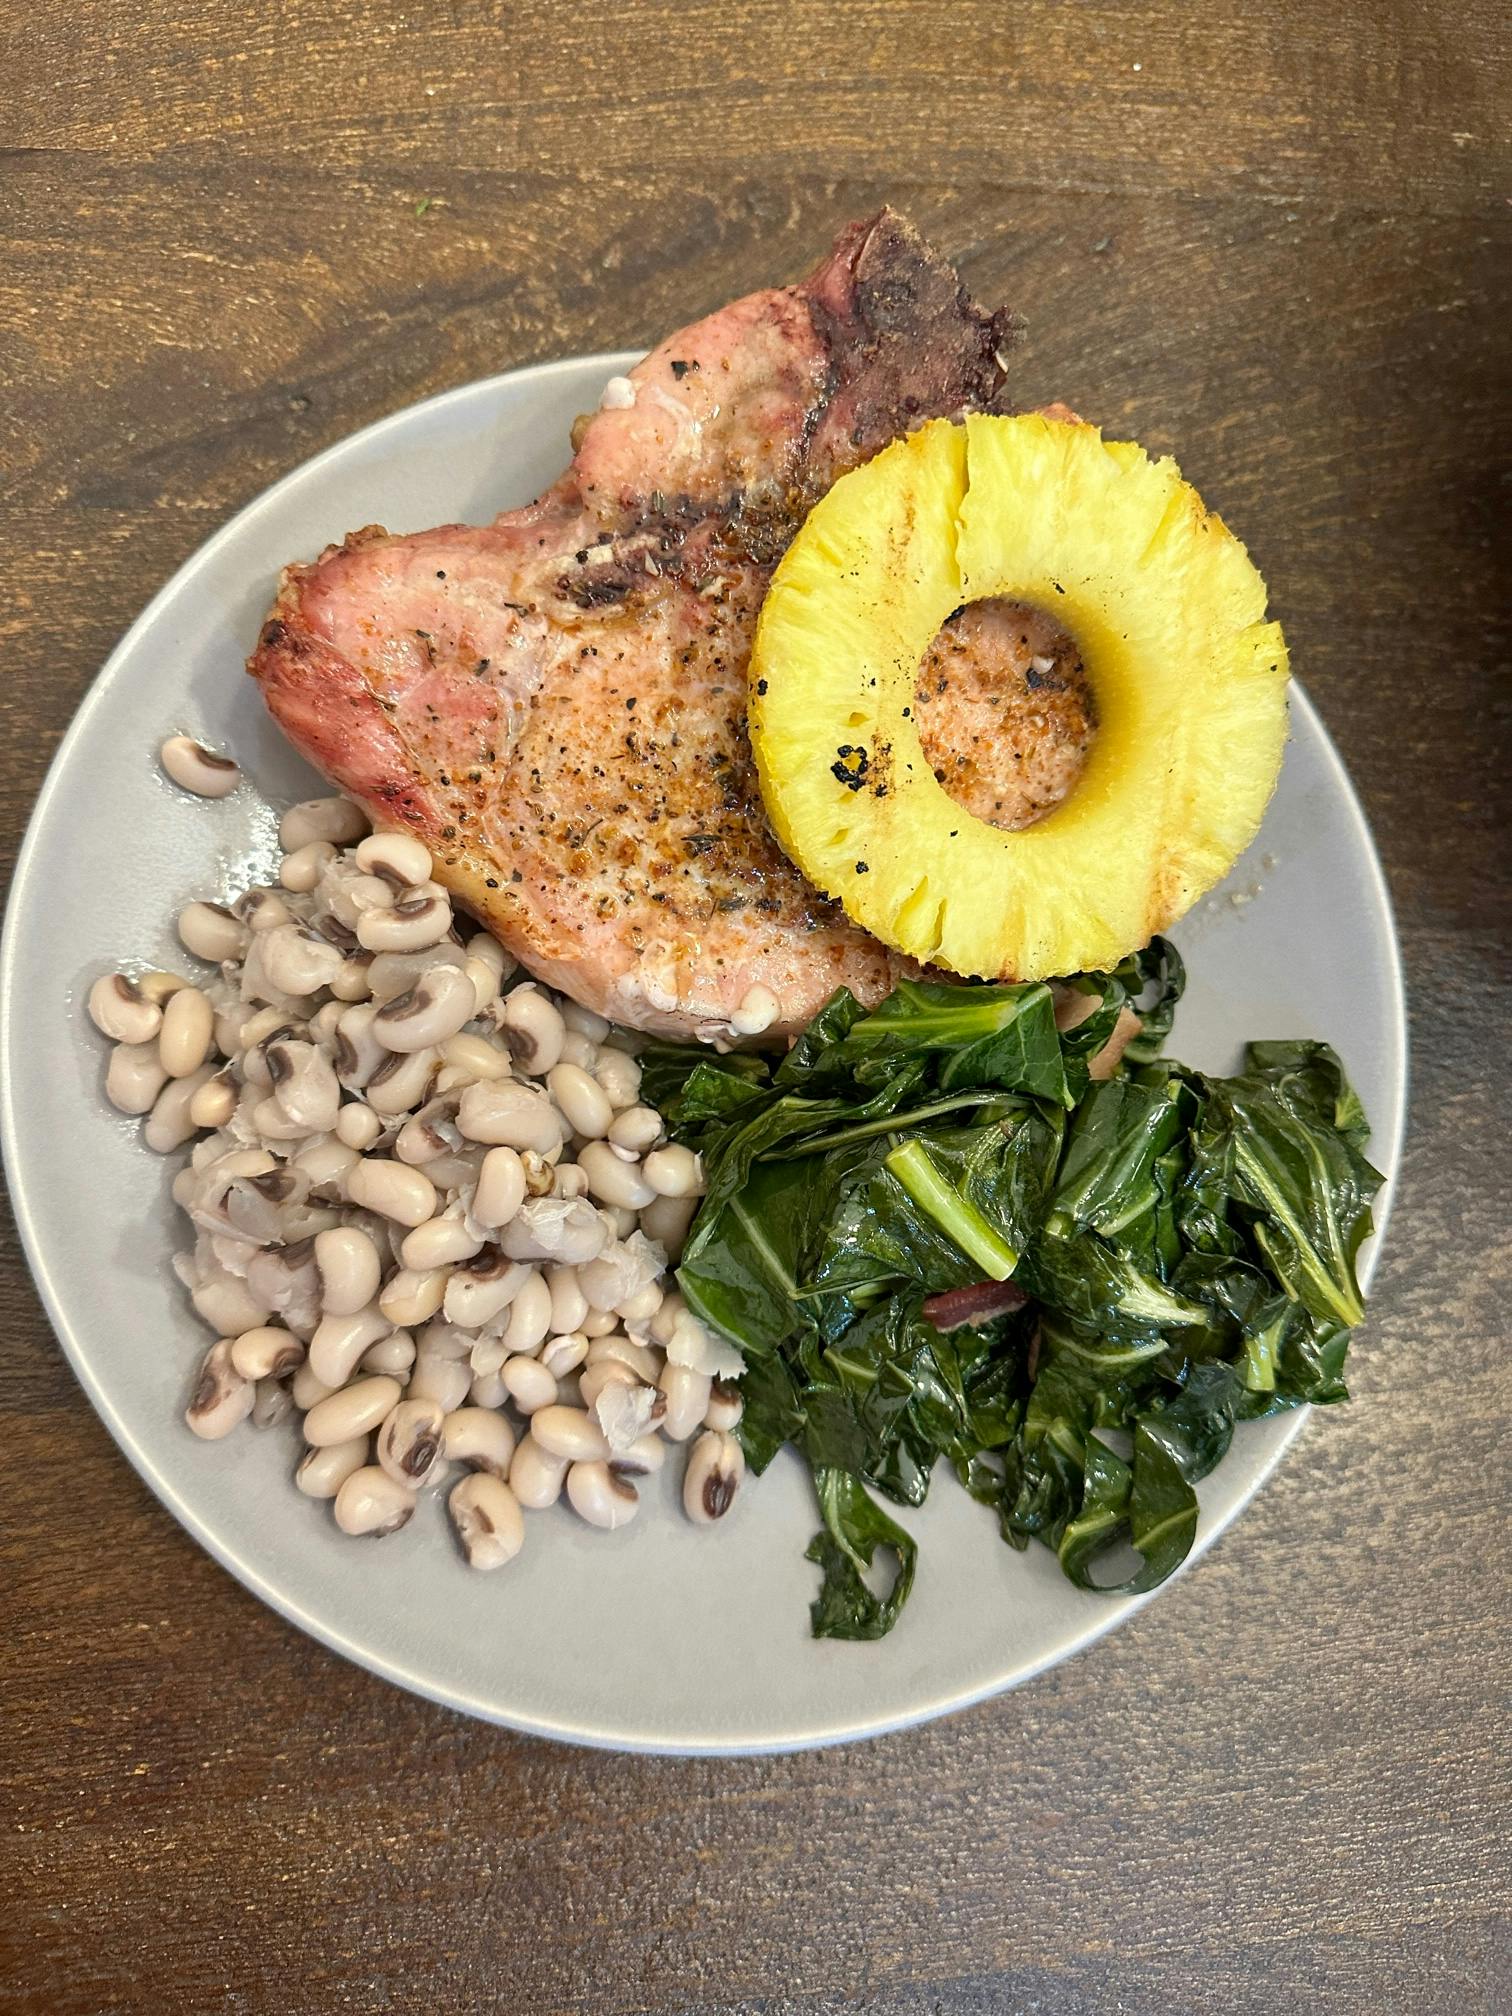 A plate with black eyed peas, collard greens and a pork chop with a piece of pineapple on top of it